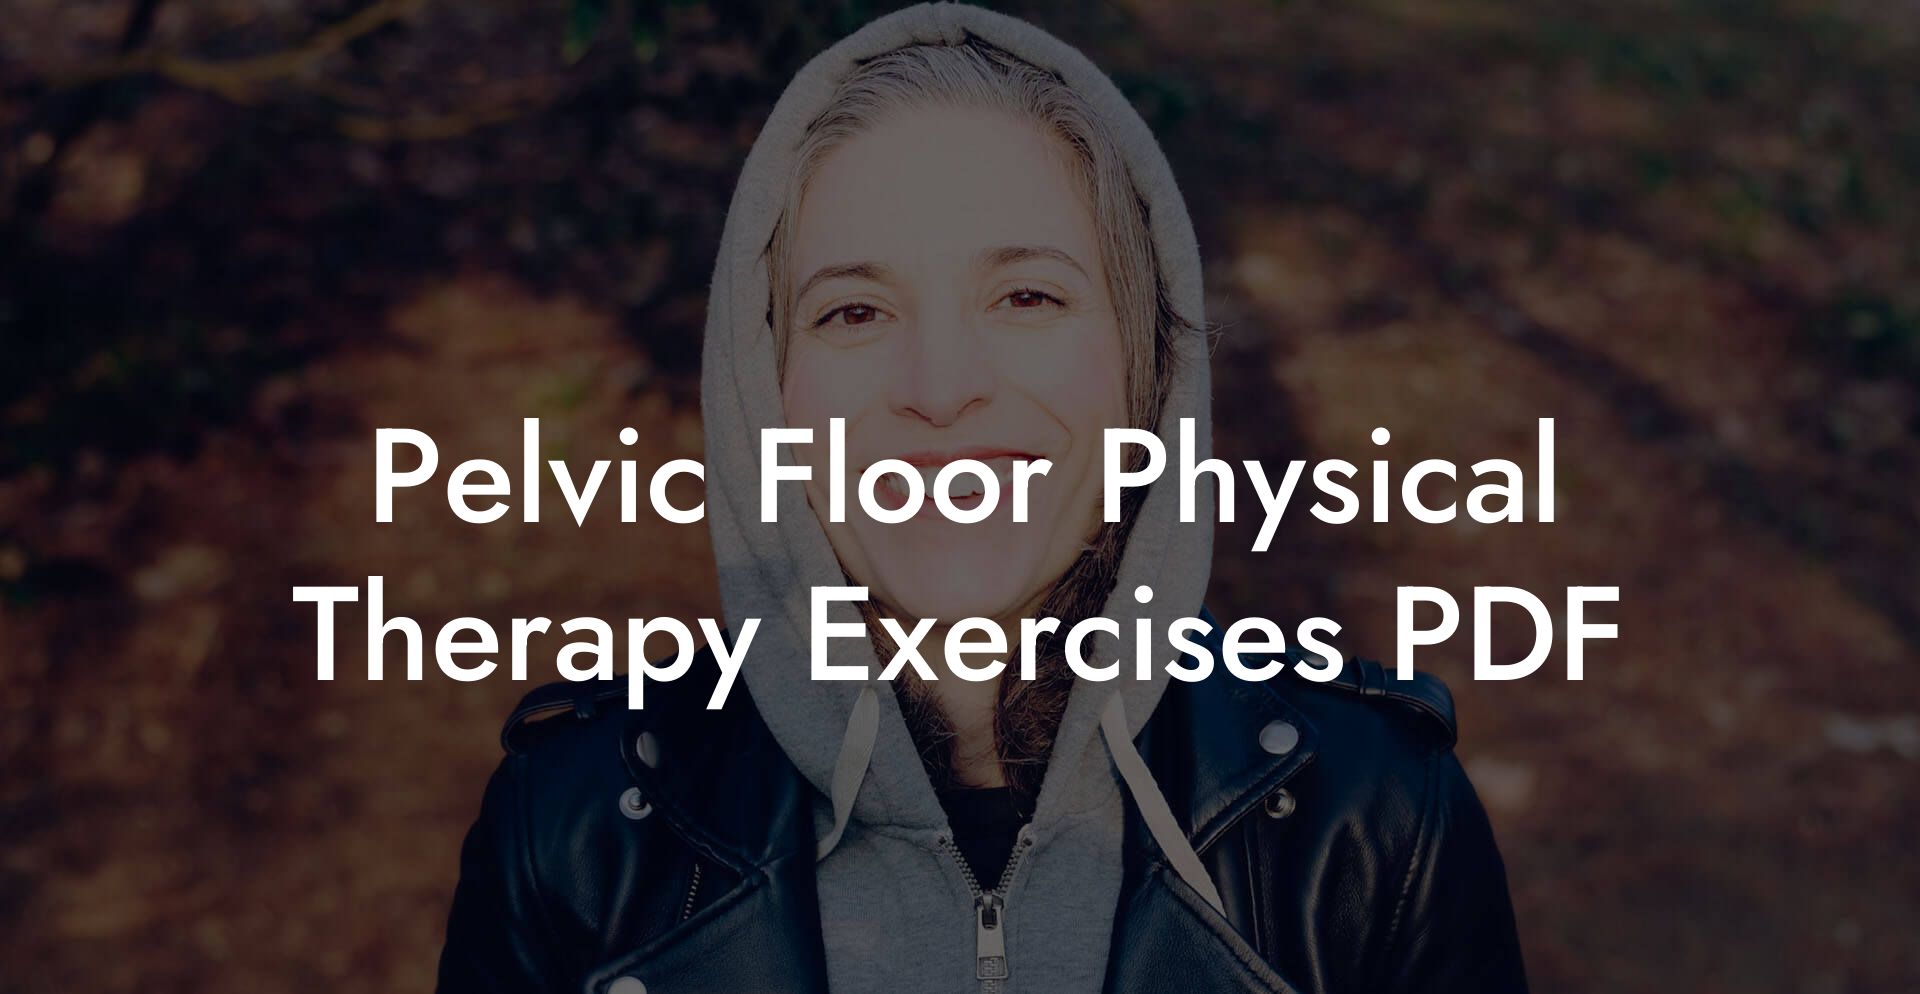 Pelvic Floor Physical Therapy Exercises PDF